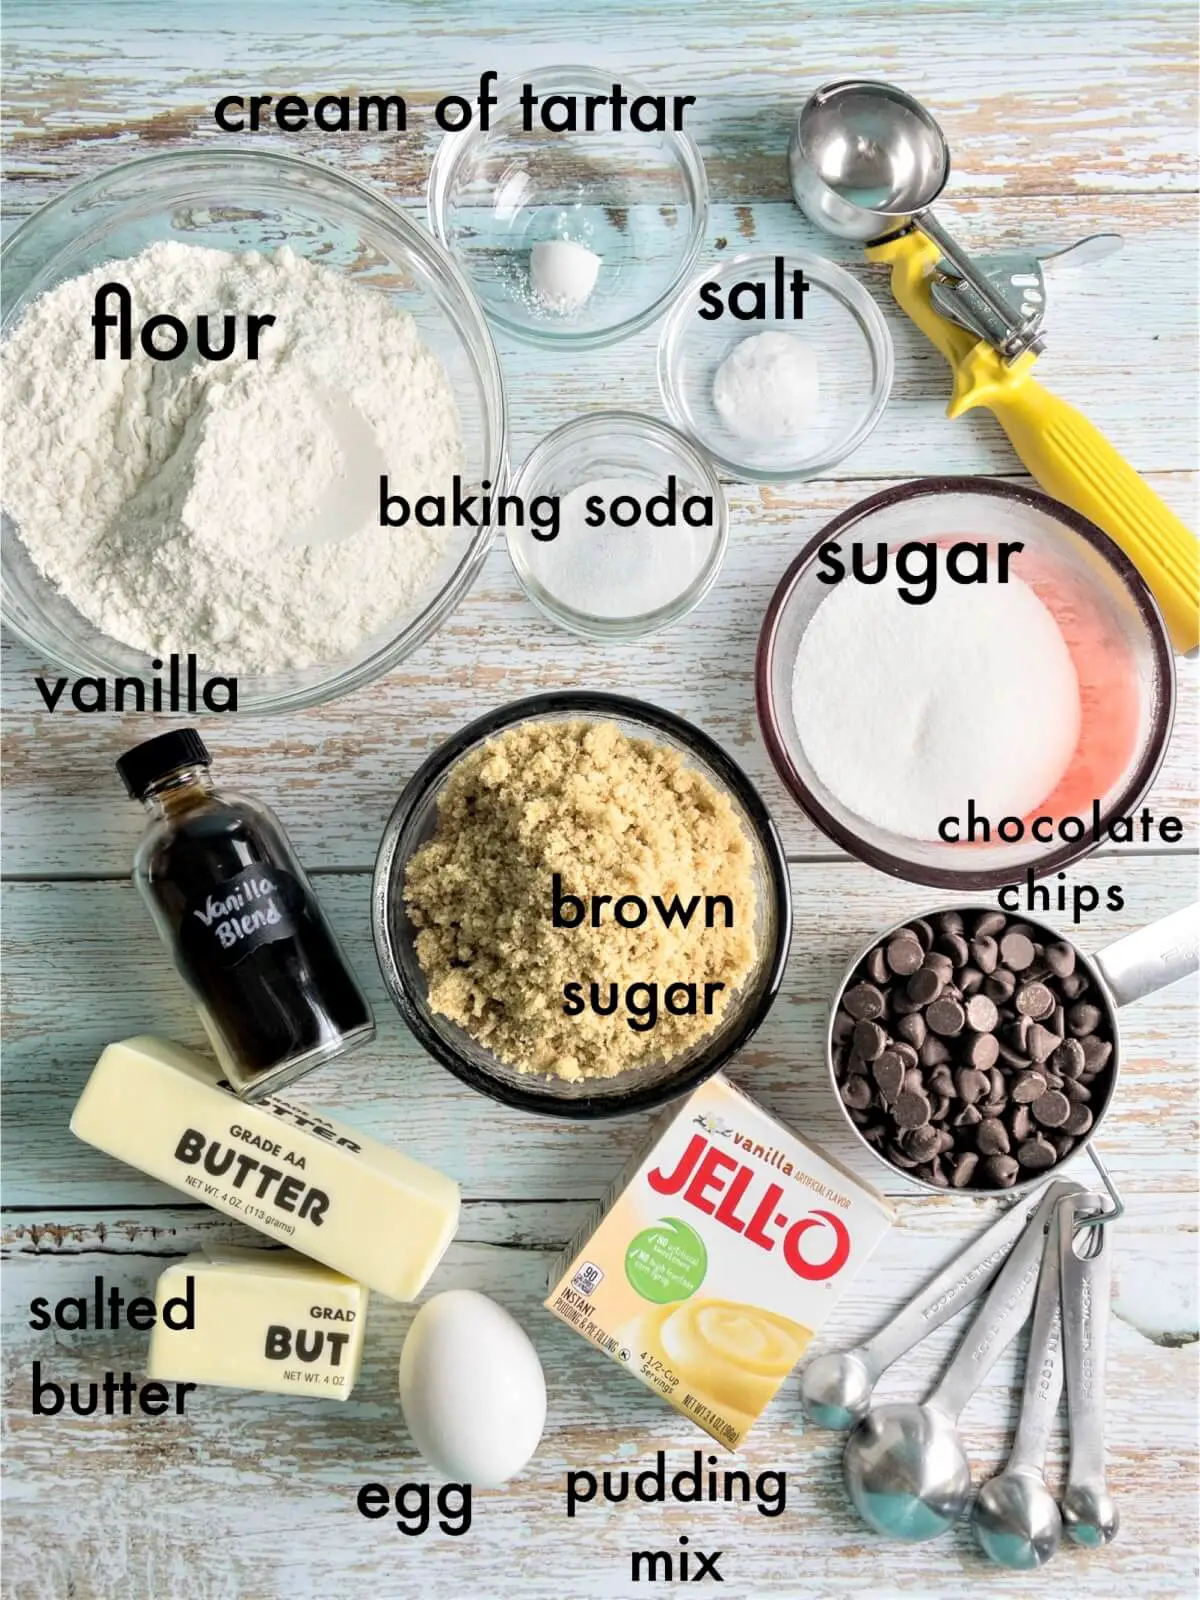 An overhead shot of chocolate chip cookie ingredients, labeled "brown sugar, sugar, chocolate chips, Jello instant pudding mix, salted butter, vanilla, flour, baking soda, salt, egg, and cream of tartar.